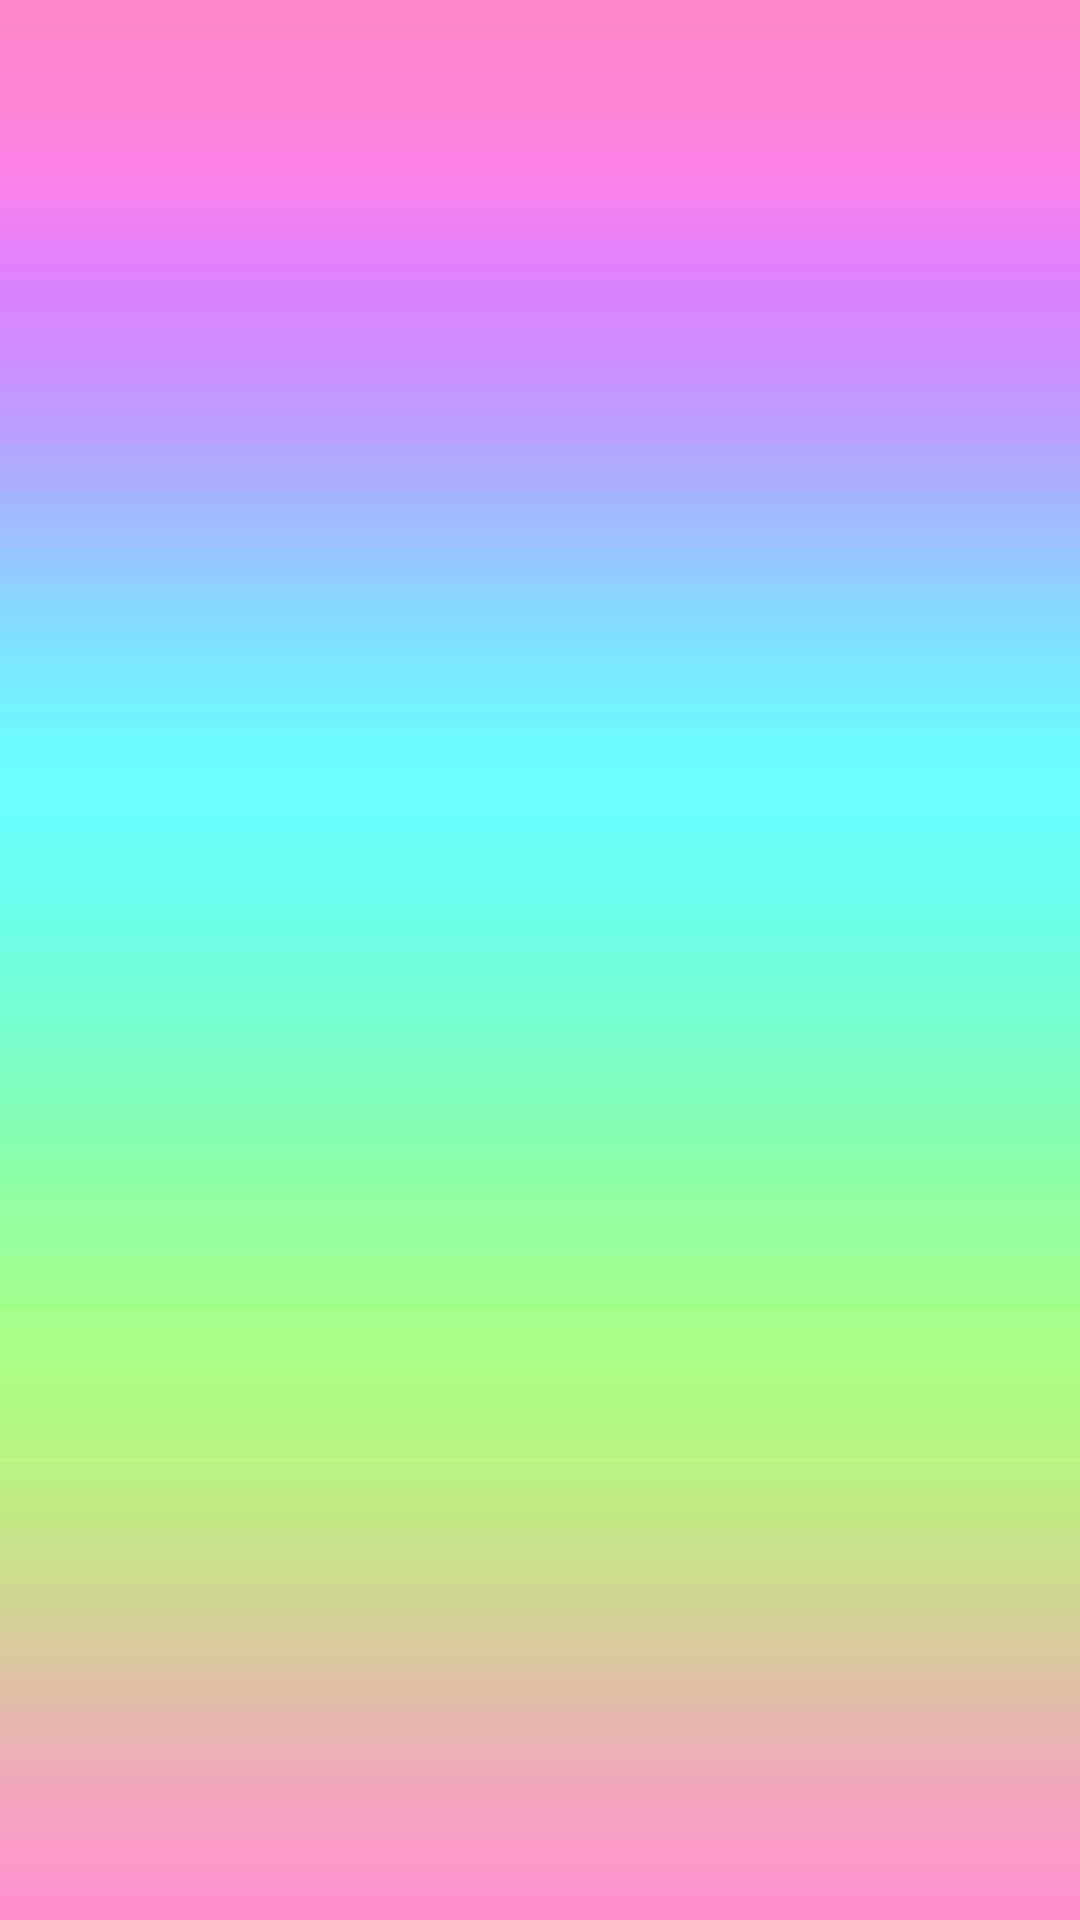 Smoothed Solid Color Pastel Wallpaper